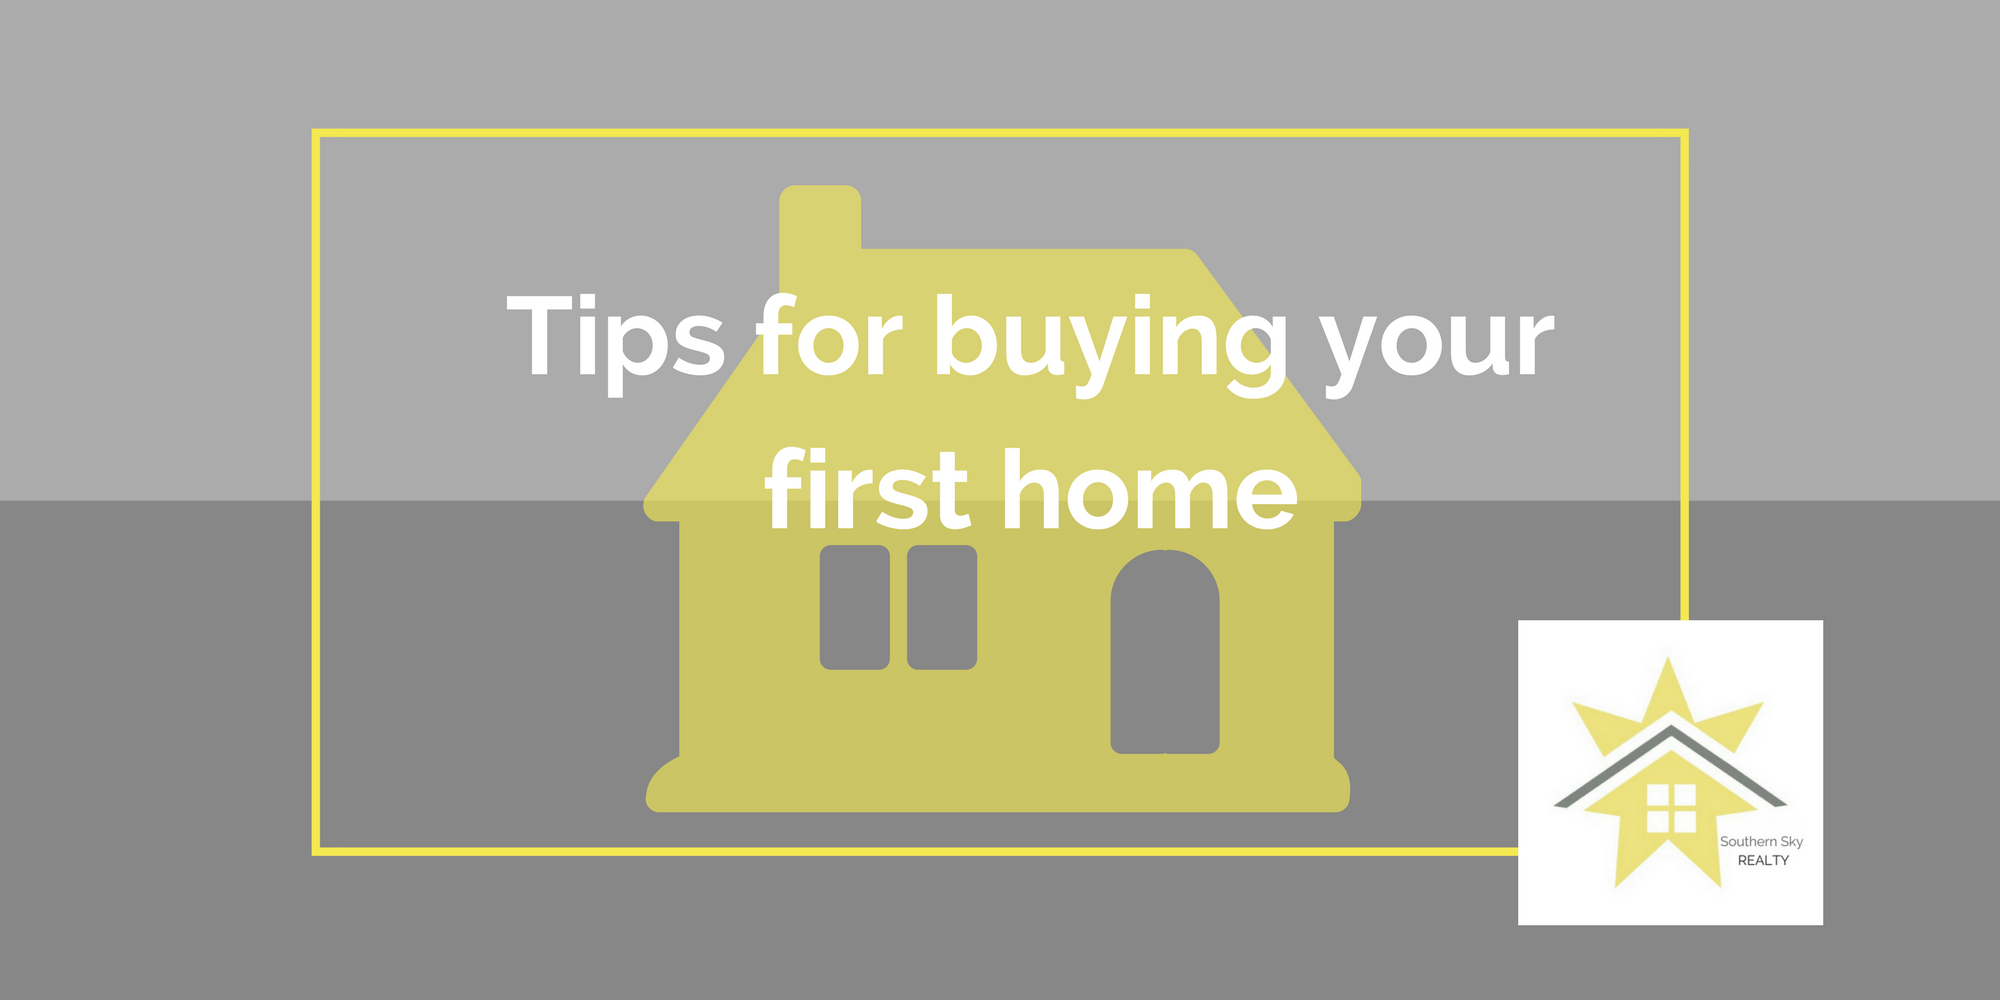 Tips for buying your first home